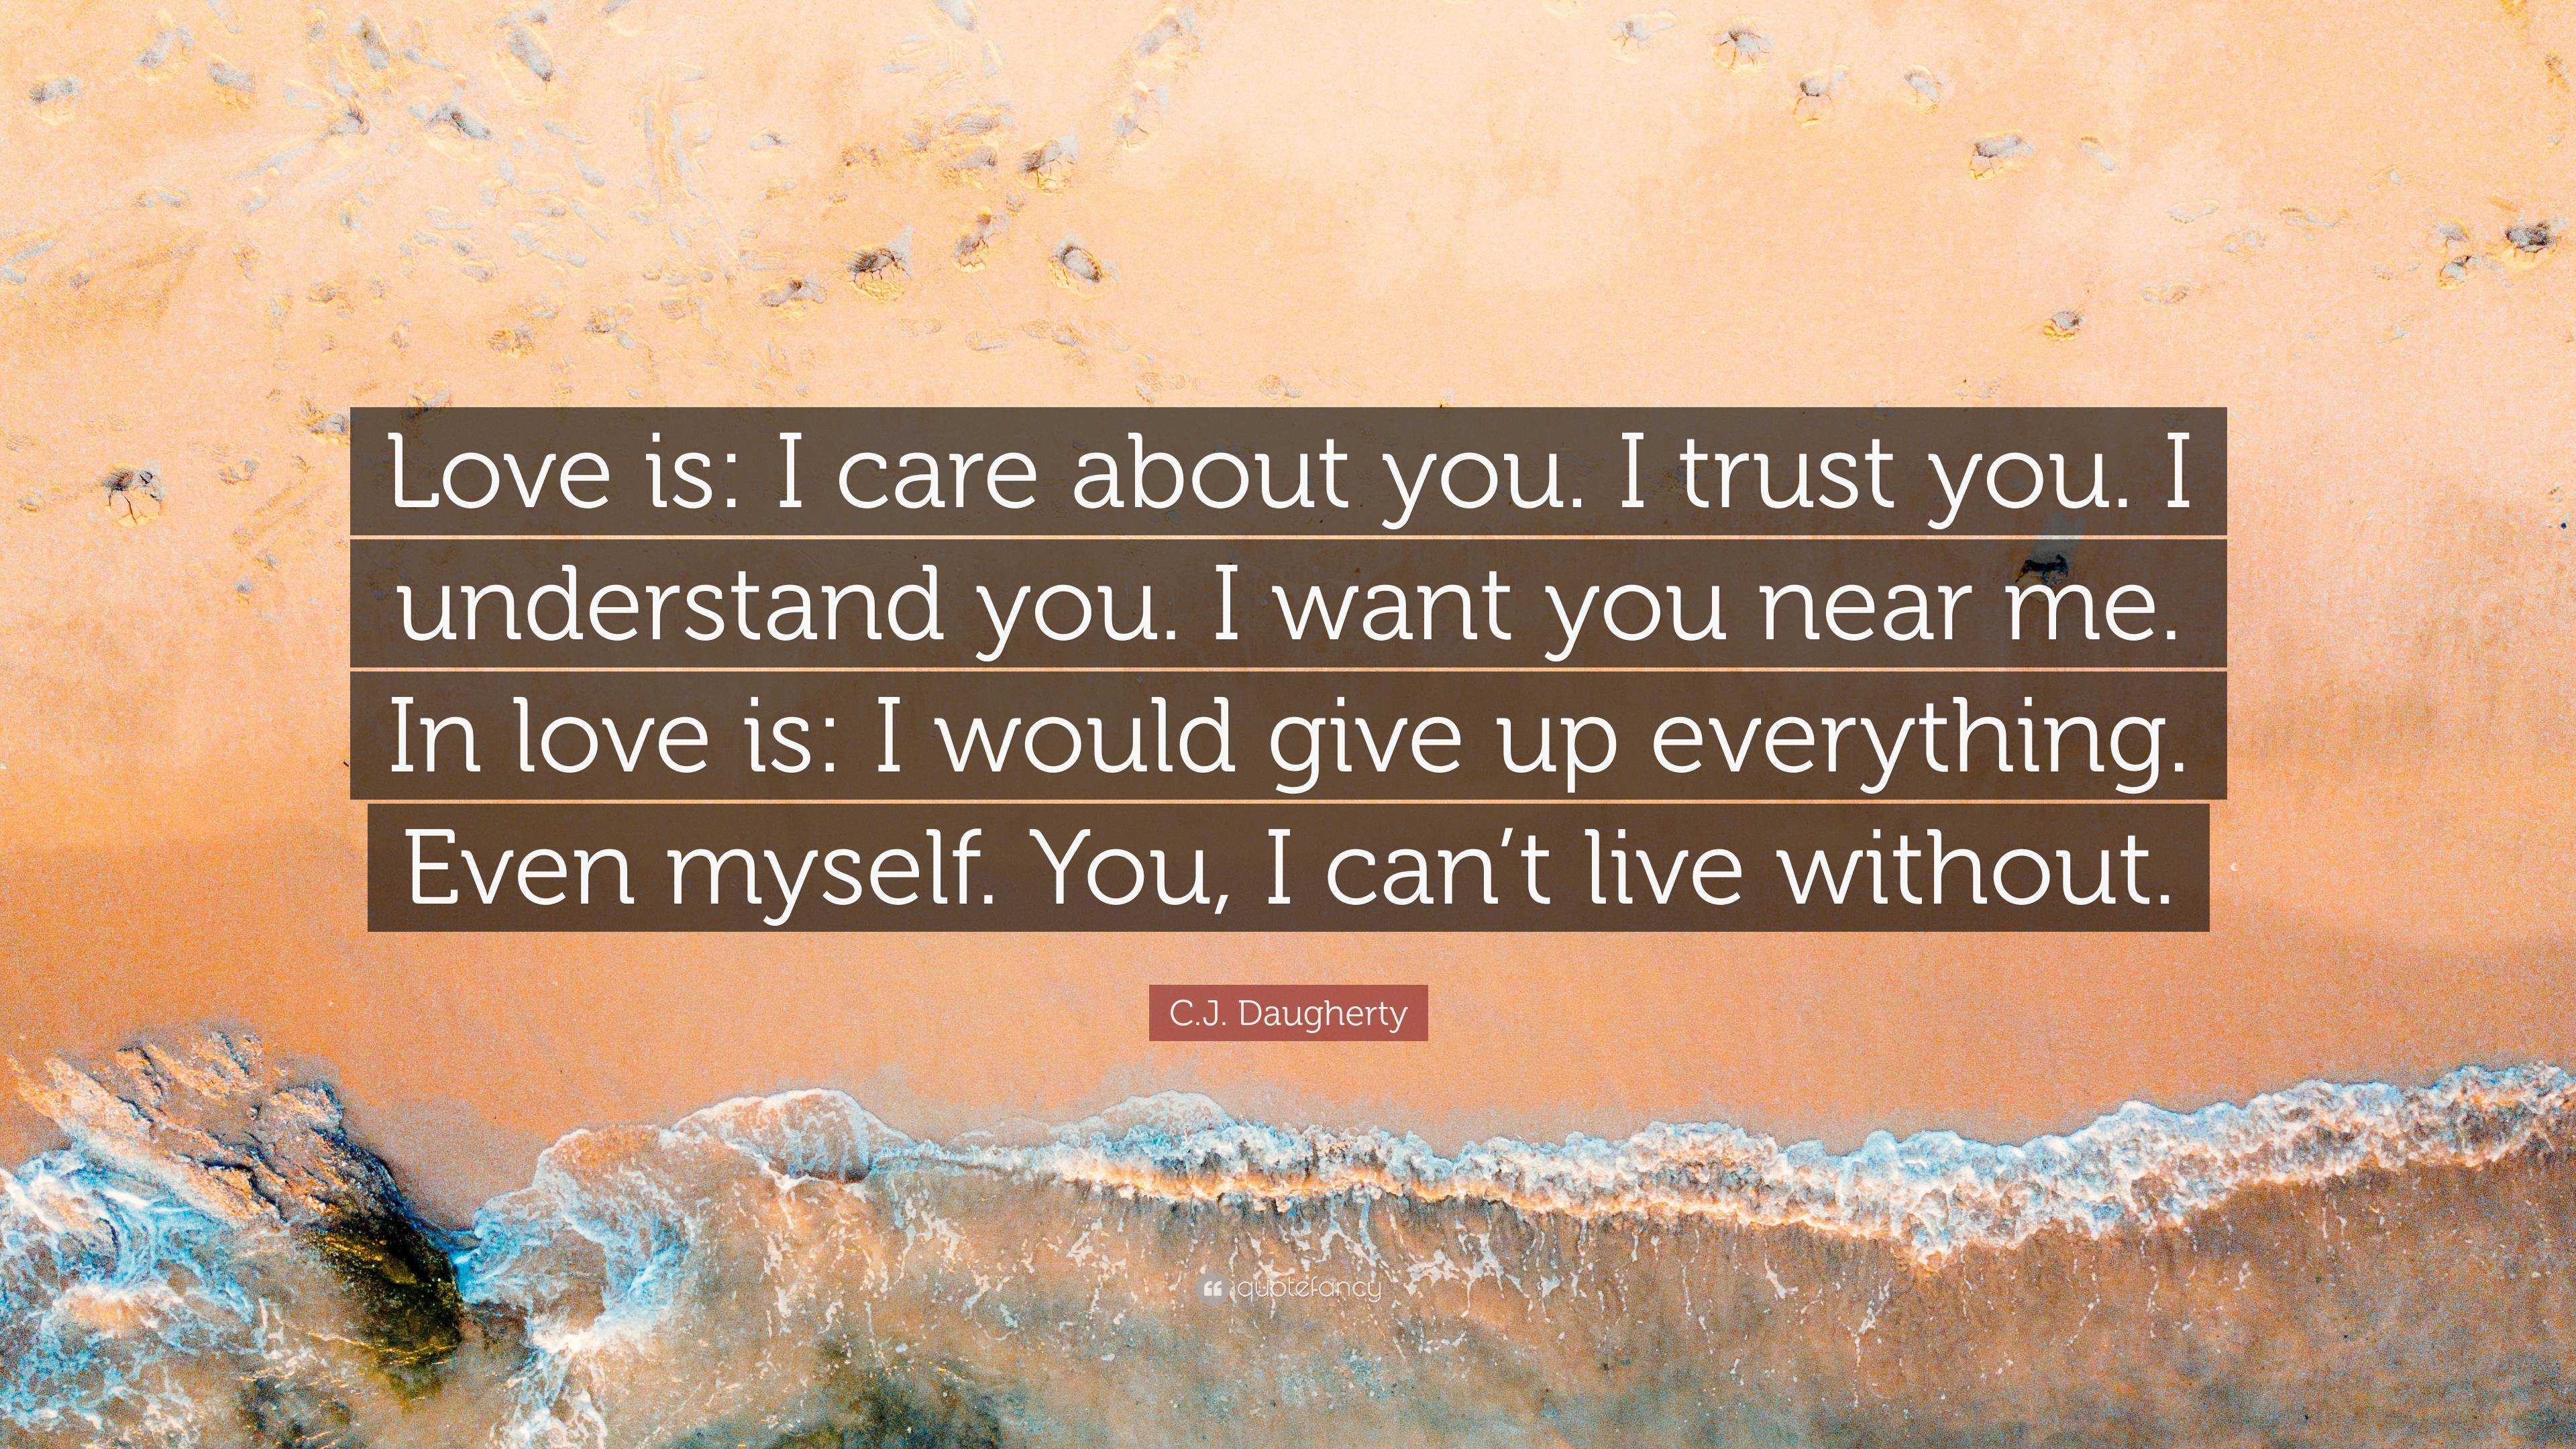 C.J. Daugherty Quote: “Love is: I care about you. I trust you. I